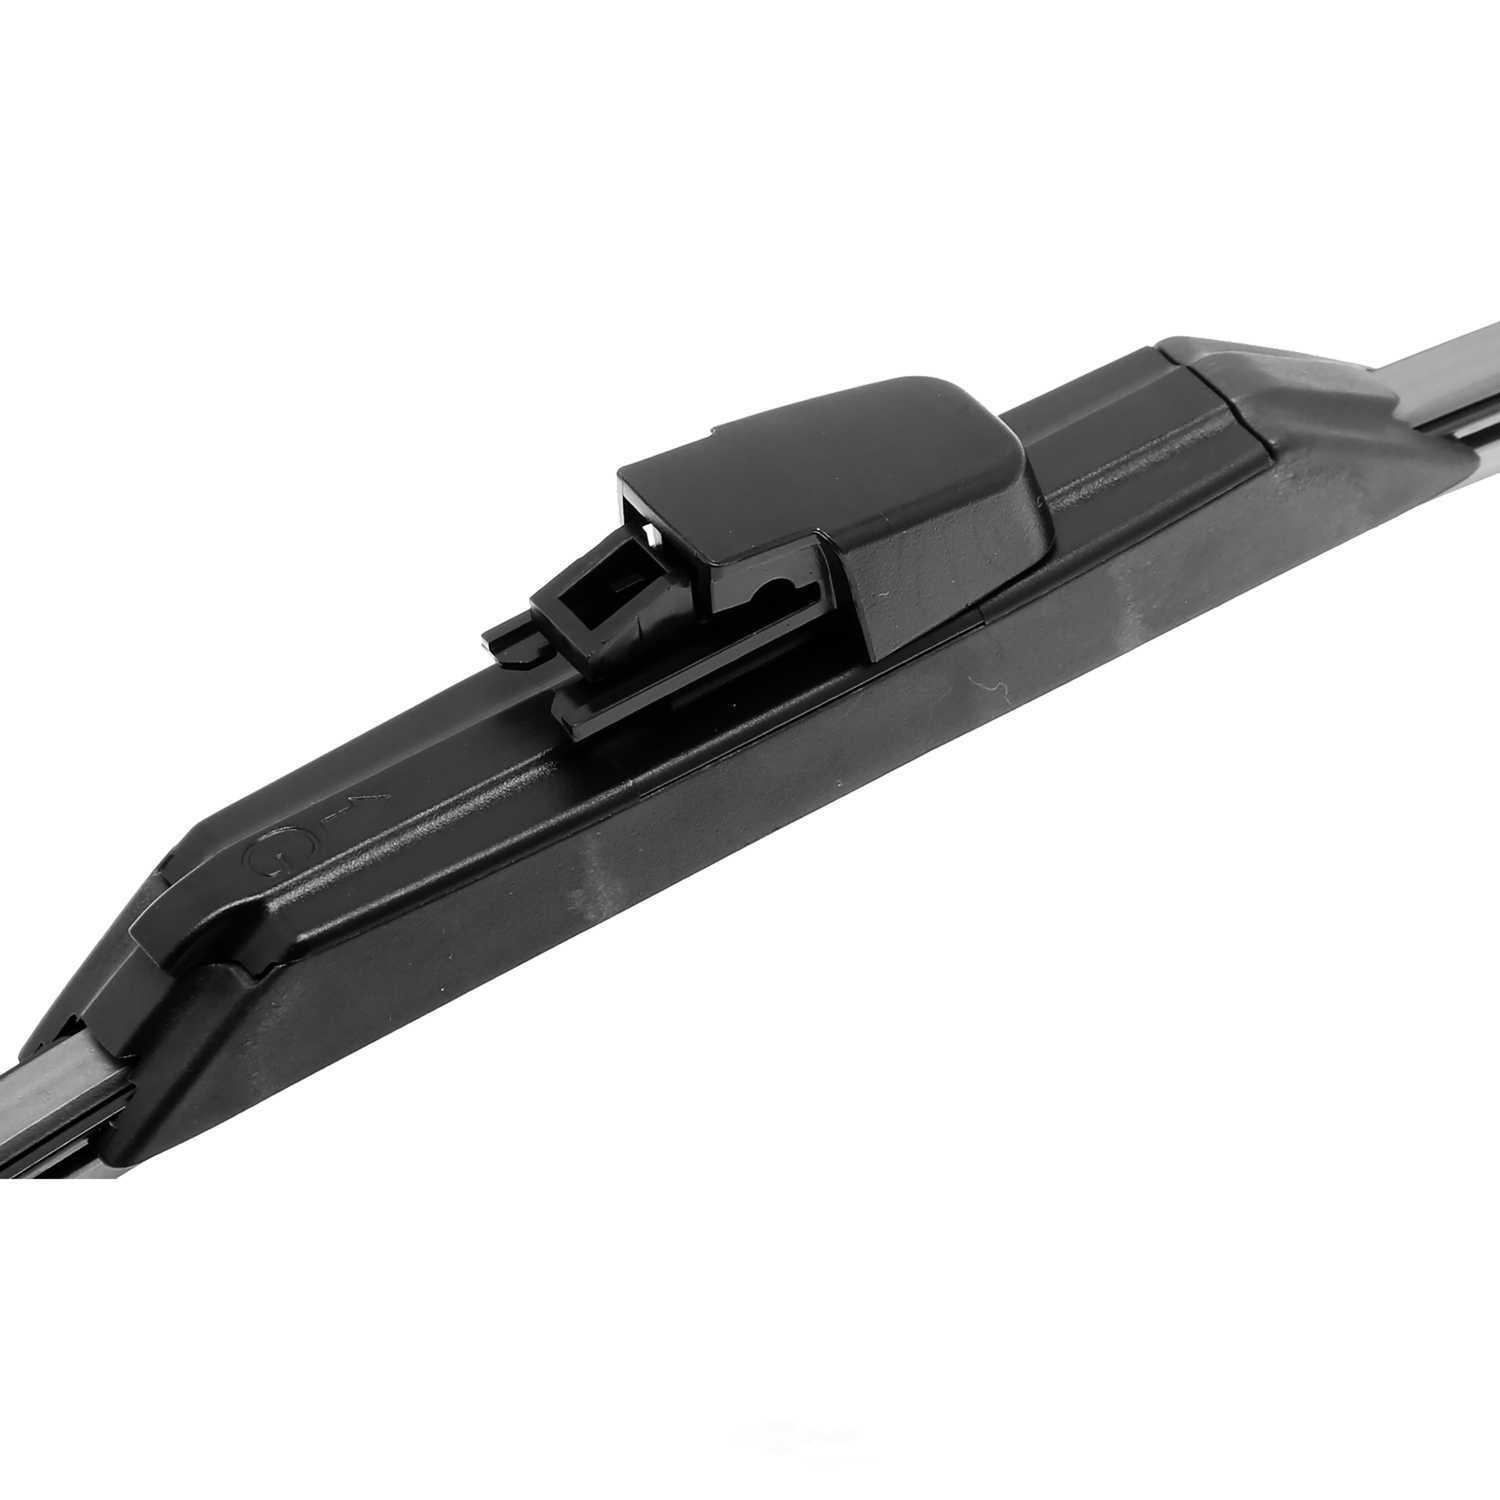 ANCO WIPER PRODUCTS - ANCO Universal Fit Rear Blade (Rear) - ANC UR-15